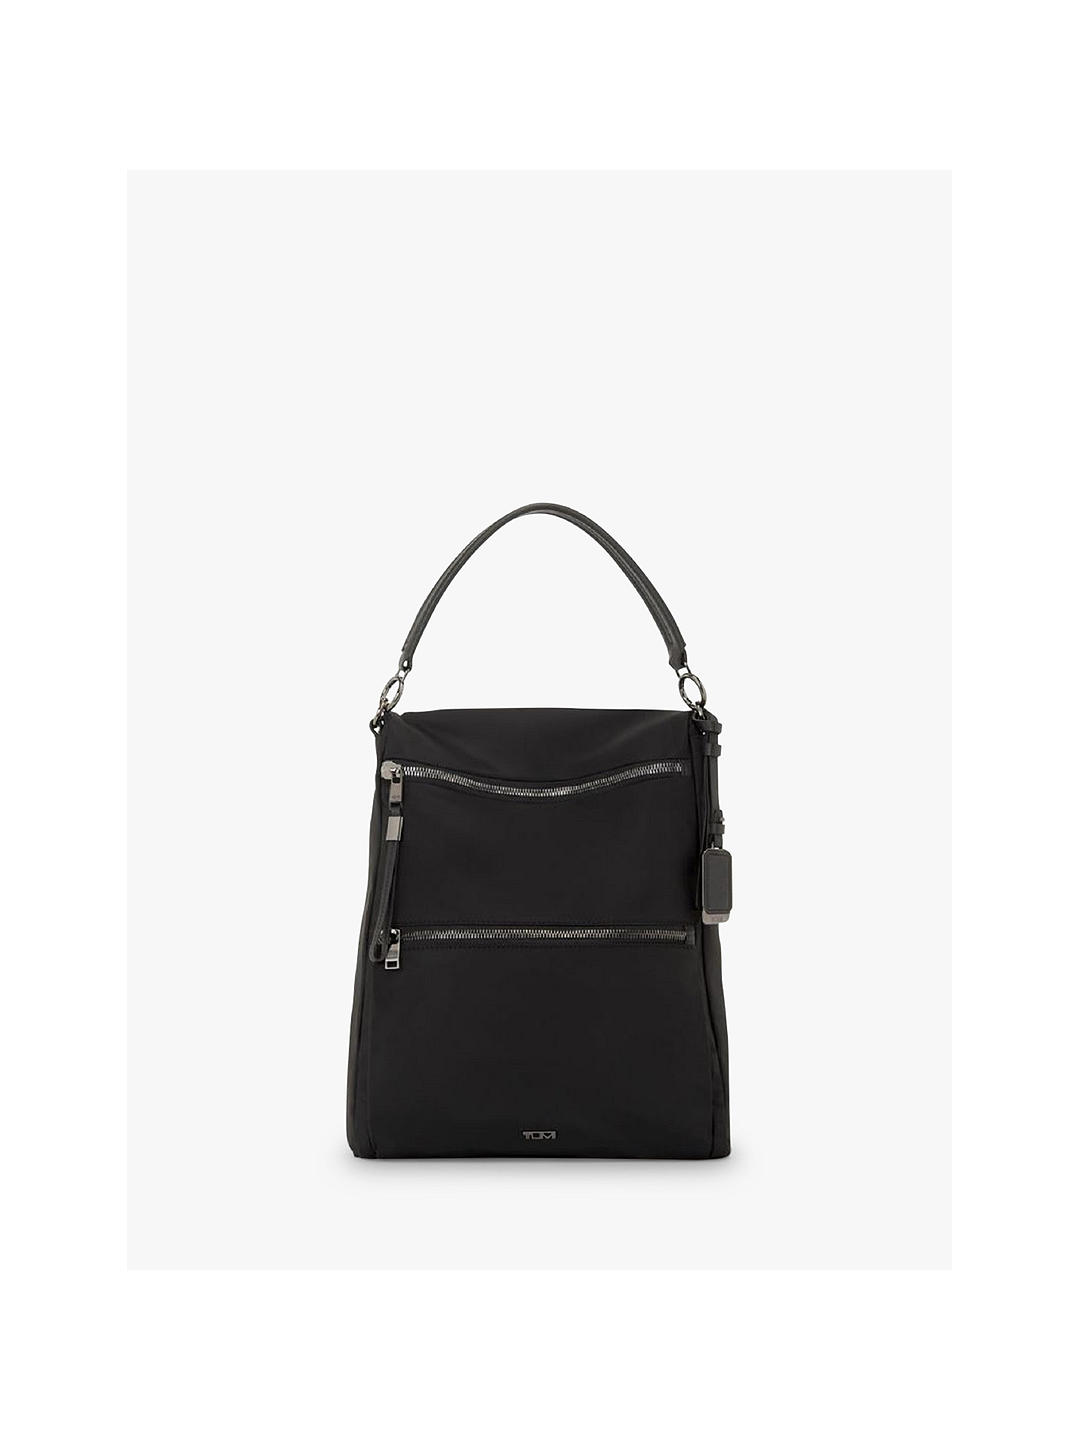 TUMI Voyageur Leigh Tote Backpack